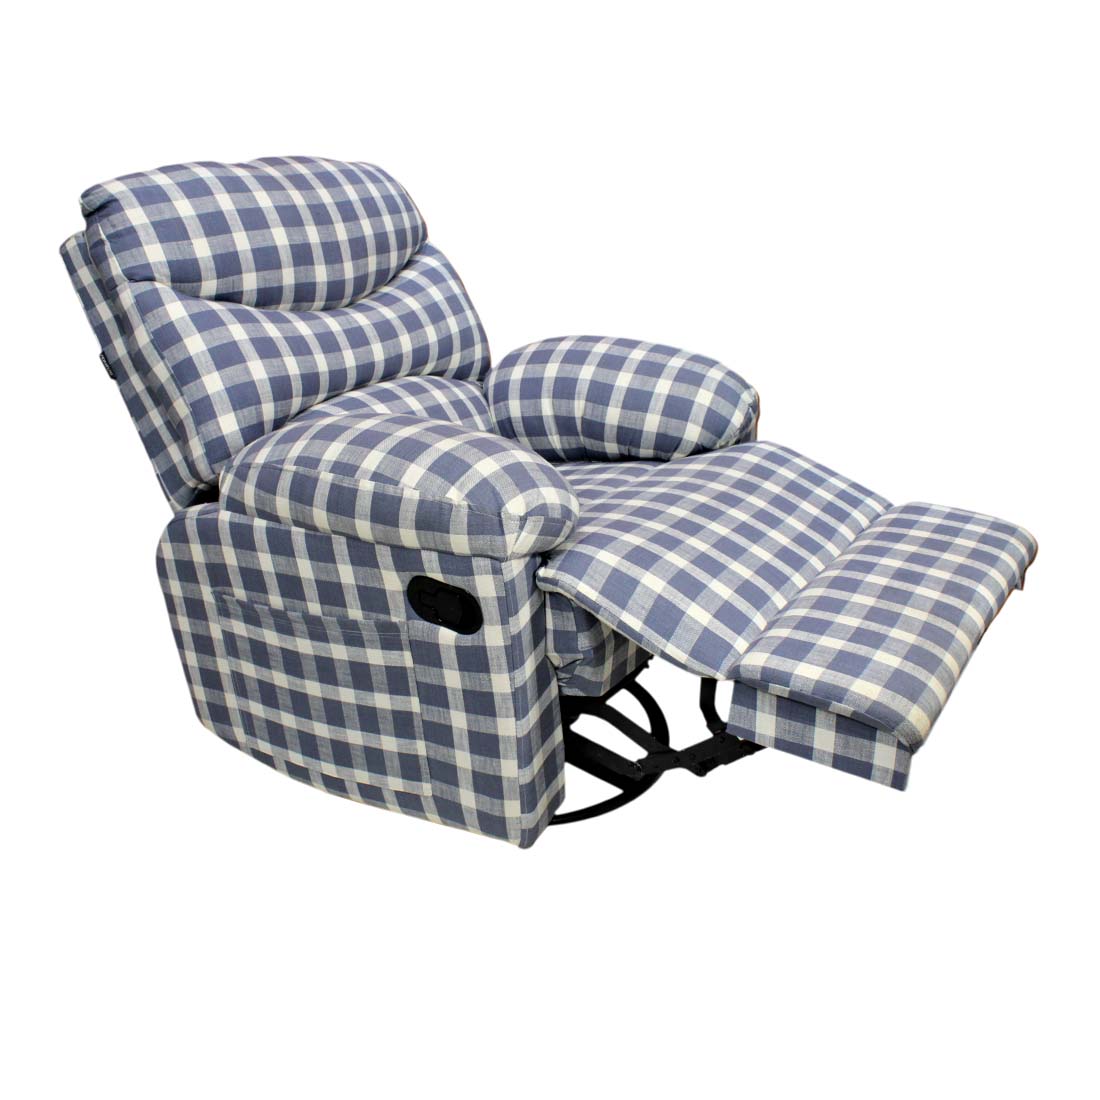 PRIMROSE Turner 1R Recliner With Cotton Fabric - Blue And White